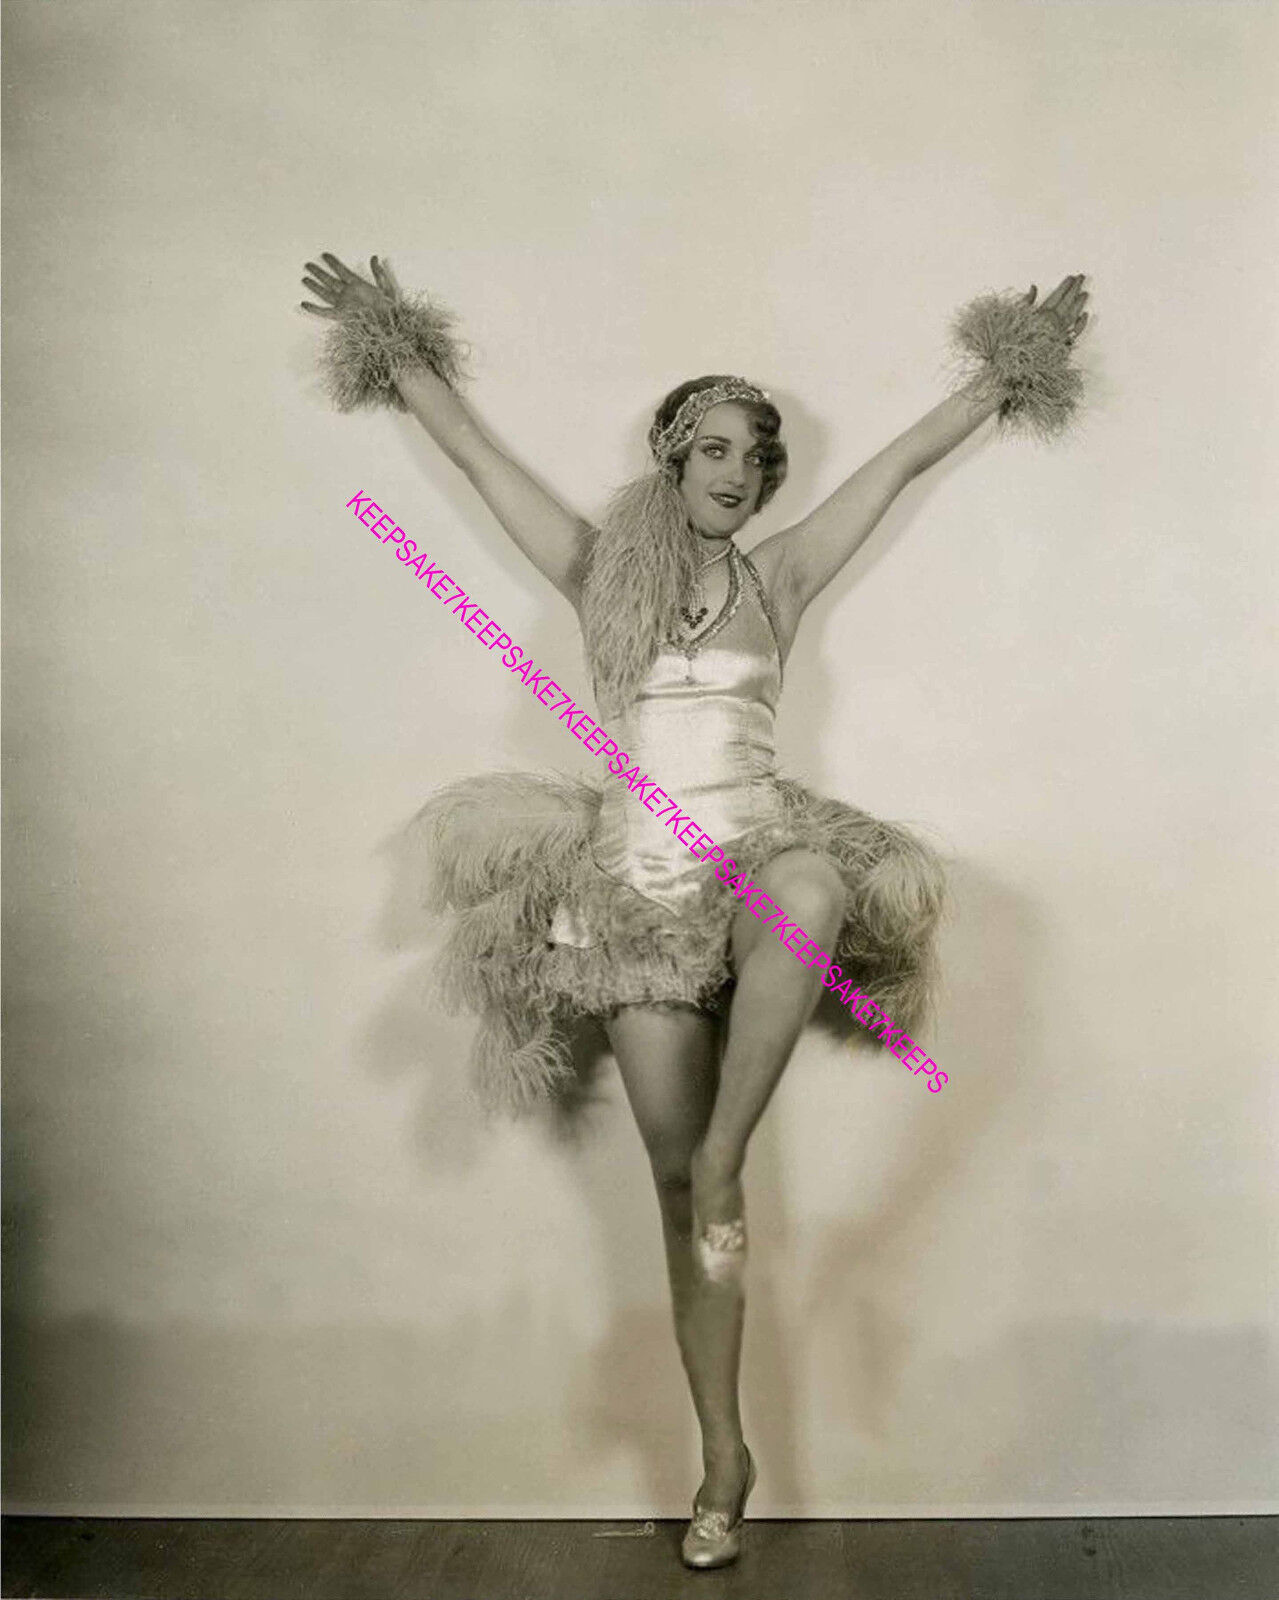 YOUNG CAROLE LOMBARD LEGGY SHOWGIRL 1920s 8x10 PHOTO A-CL18